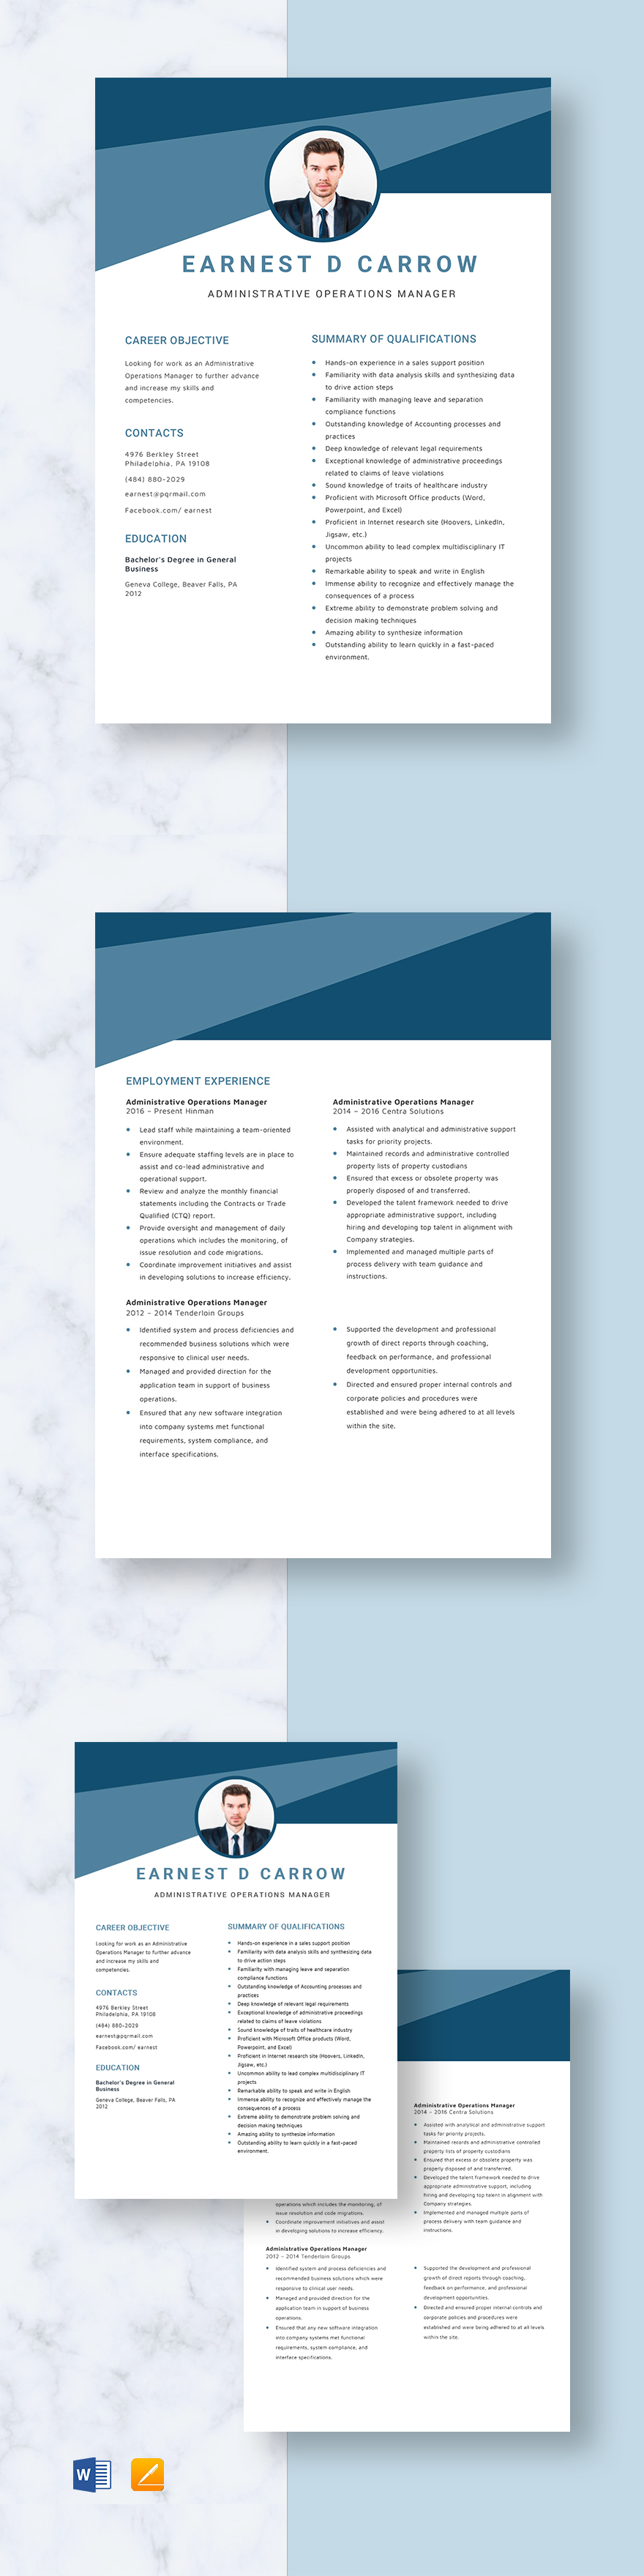 Free Administrative Operations Manager Resume Template